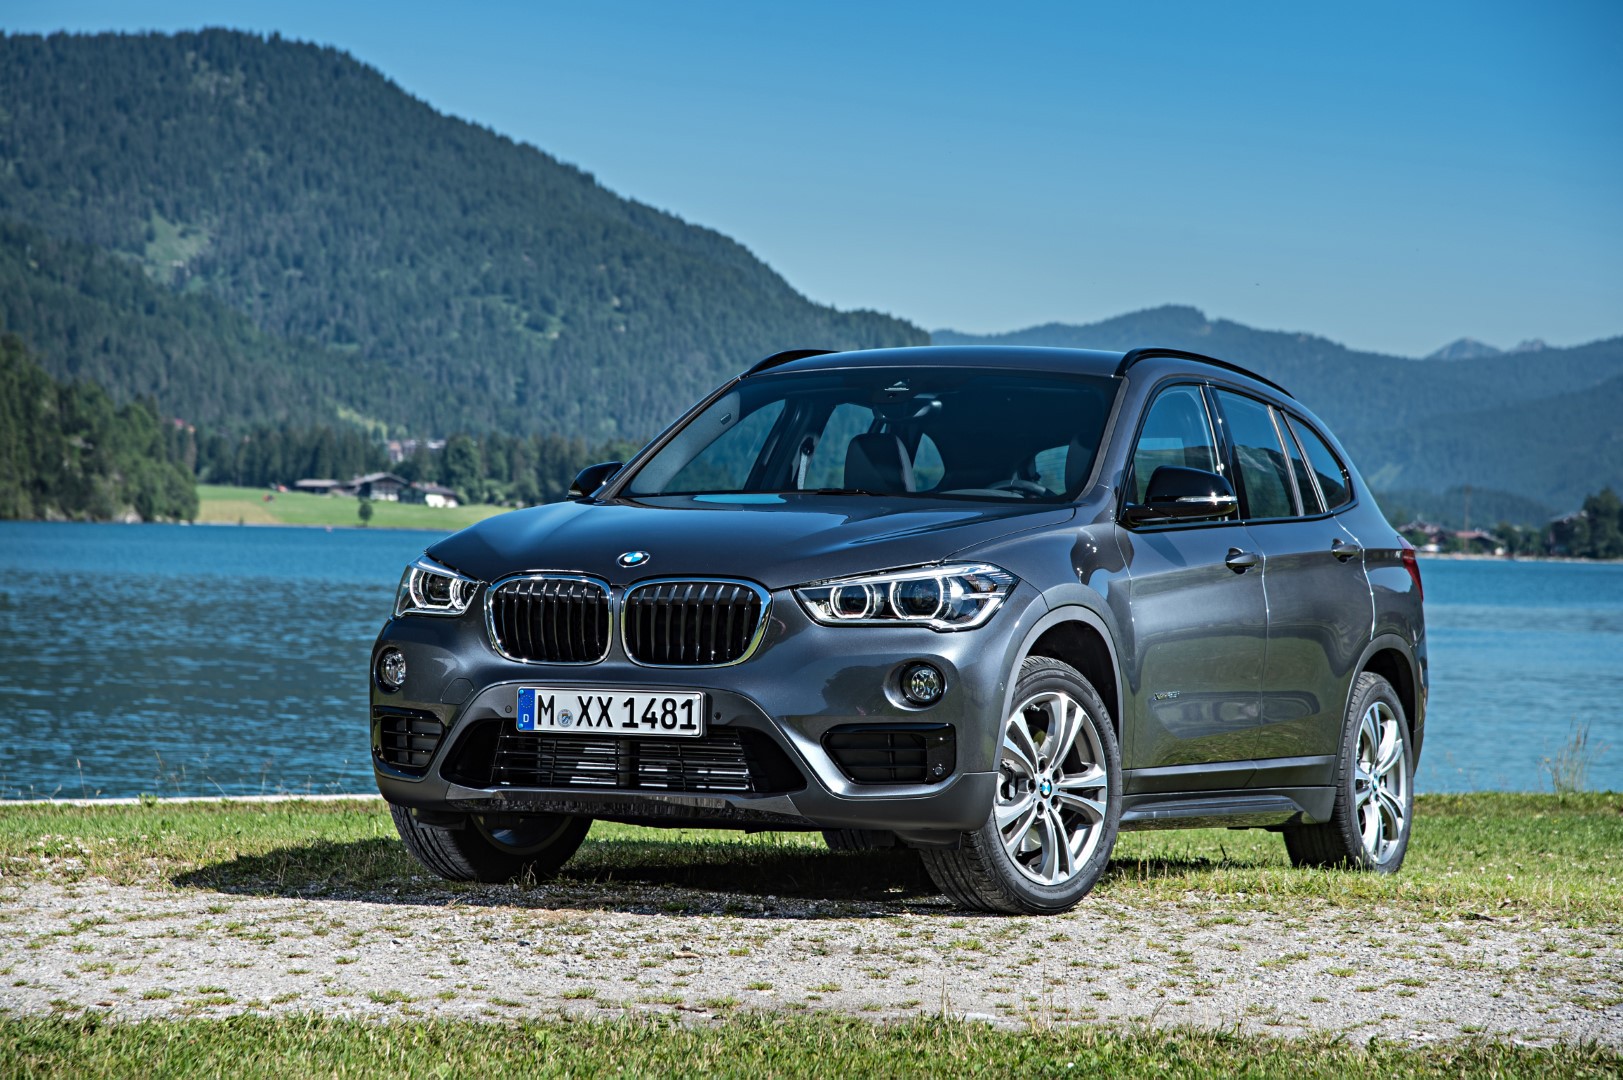 1554707771P90190751-highRes-the-new-bmw-x1-on-lo.jpg